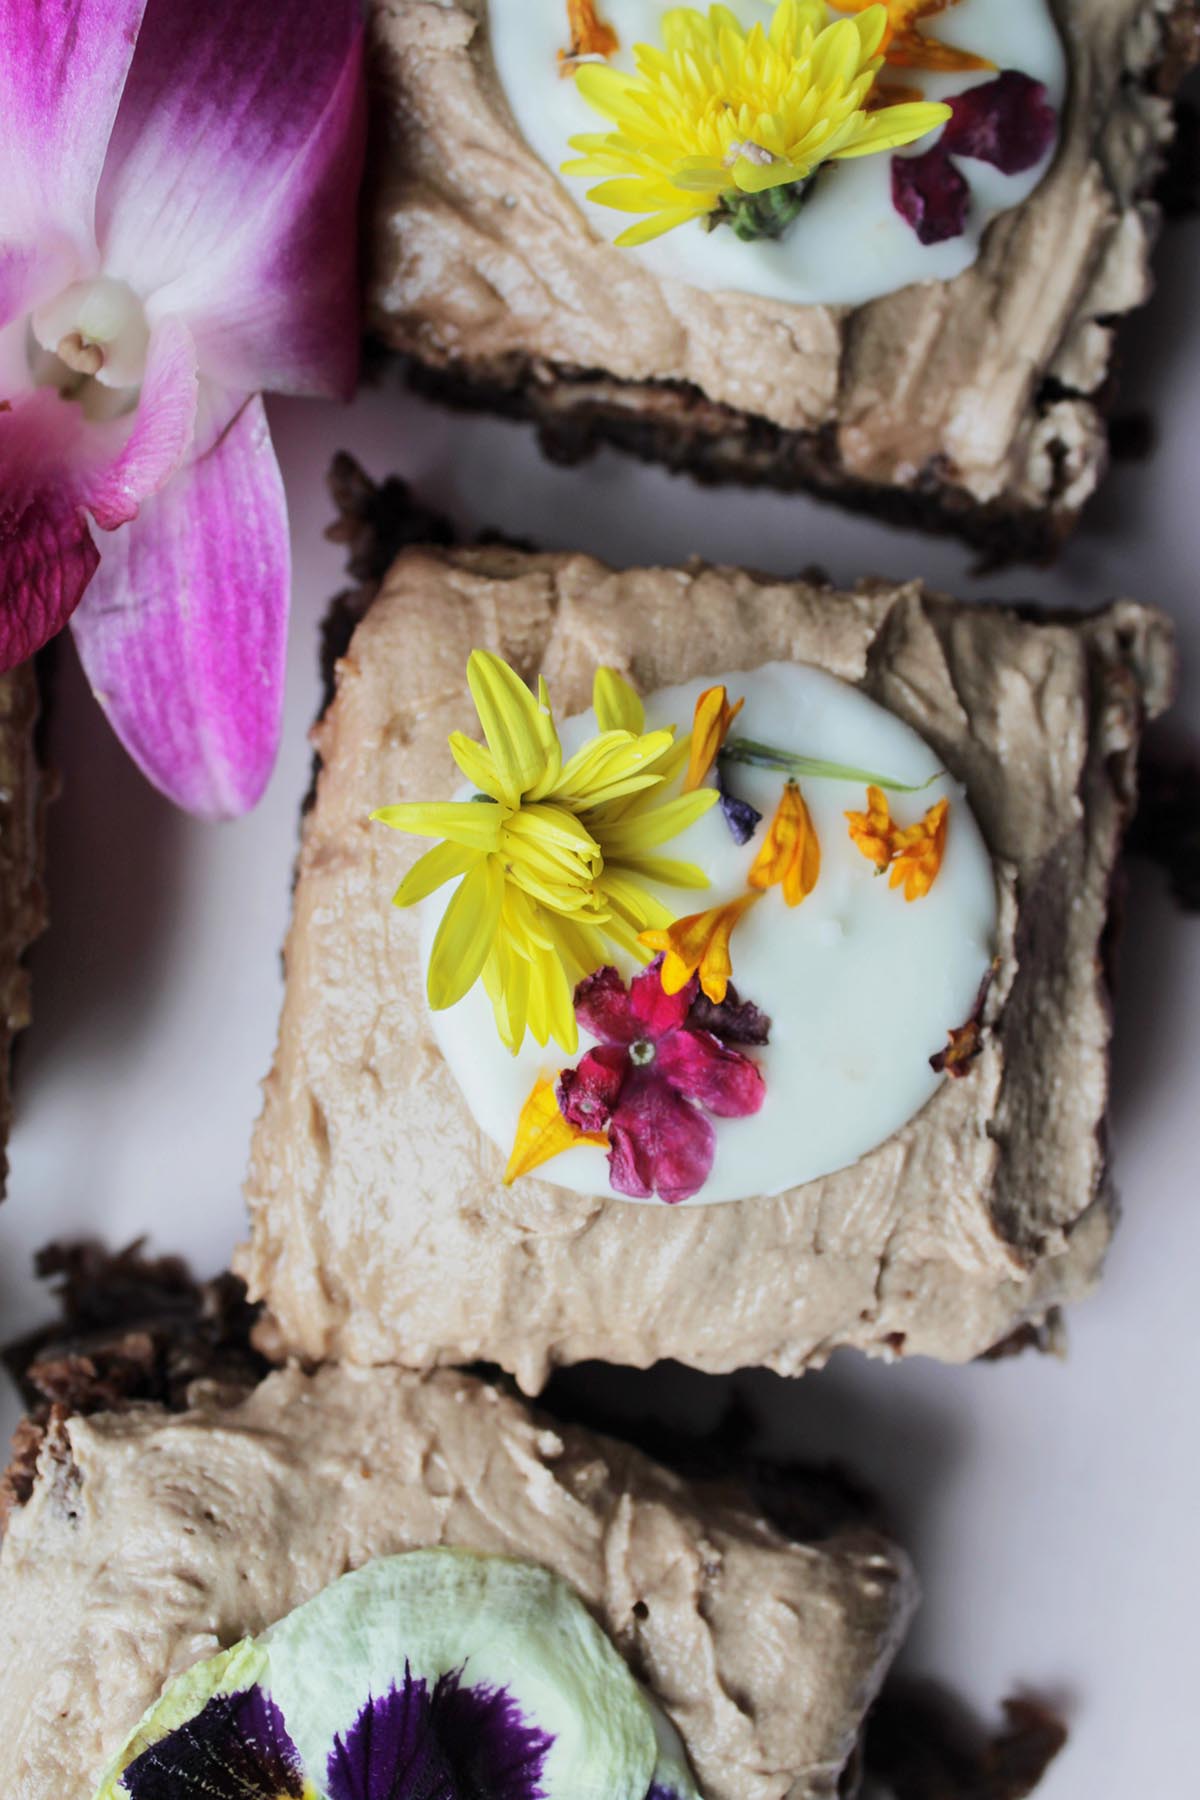 iced brownies decorated with edible flowers.